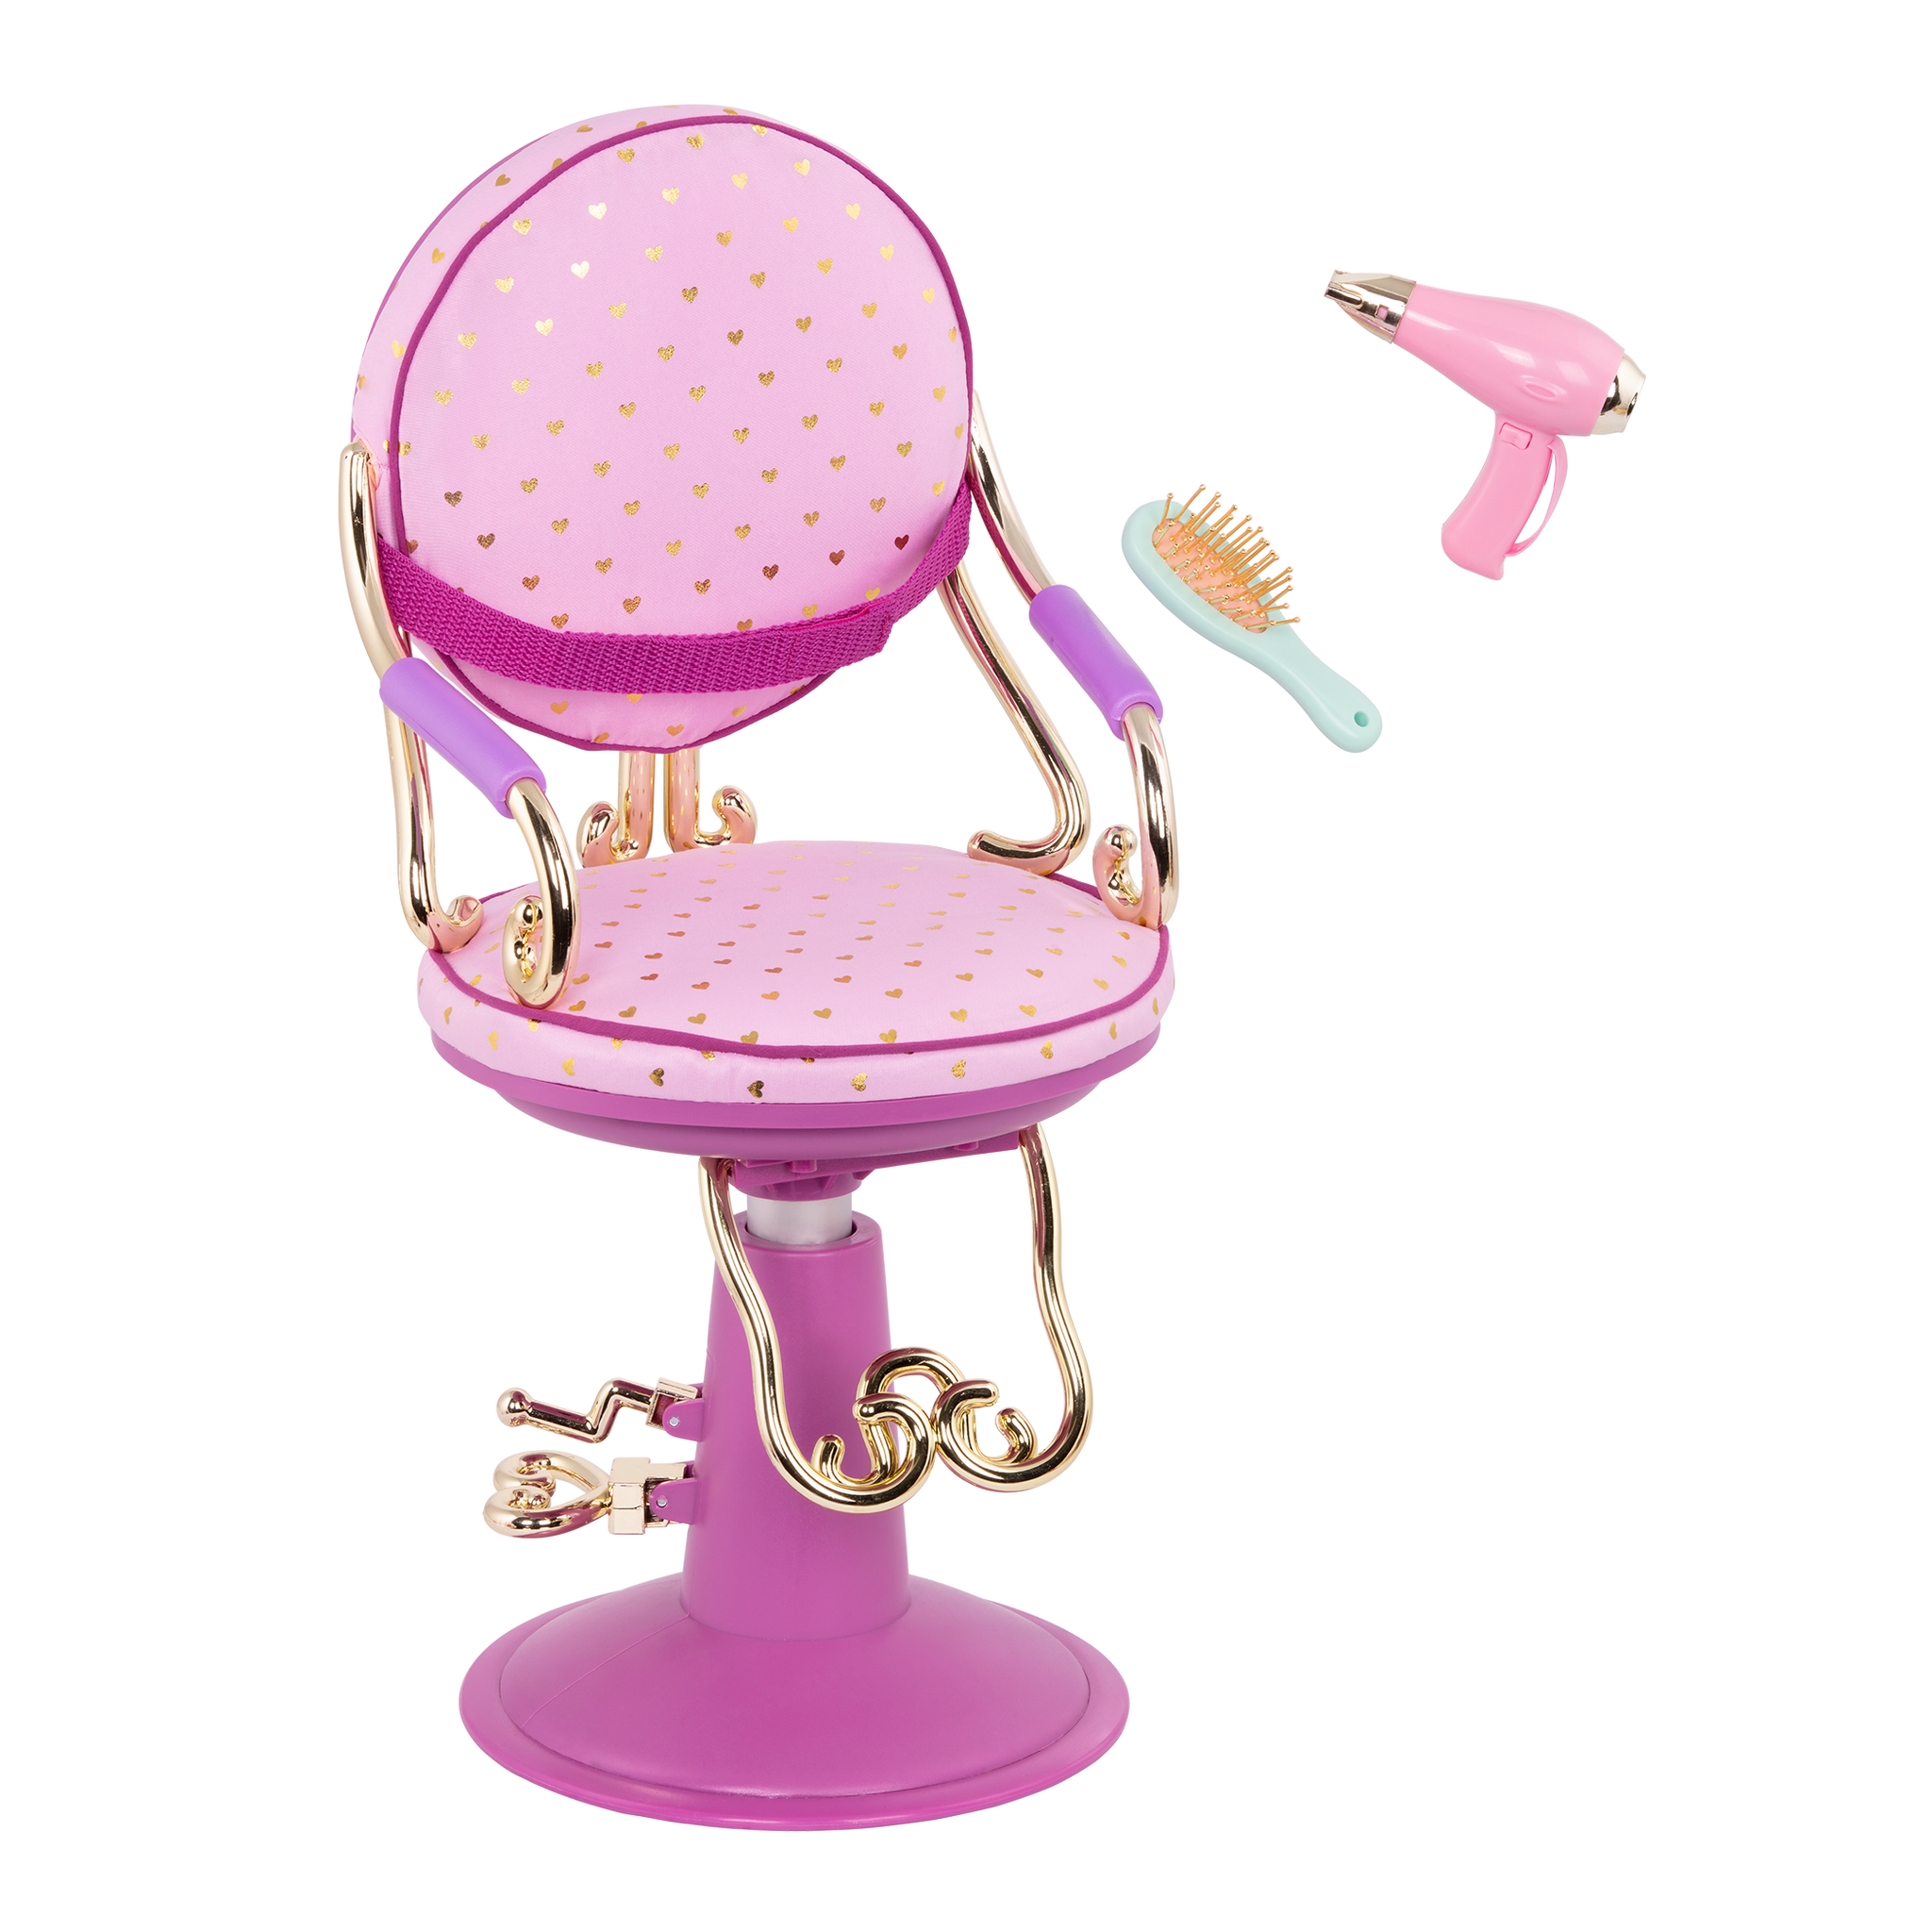 Our Generation  Accessory Set - Purple Salon Chair with  Heart Pattern The Toy Wagon